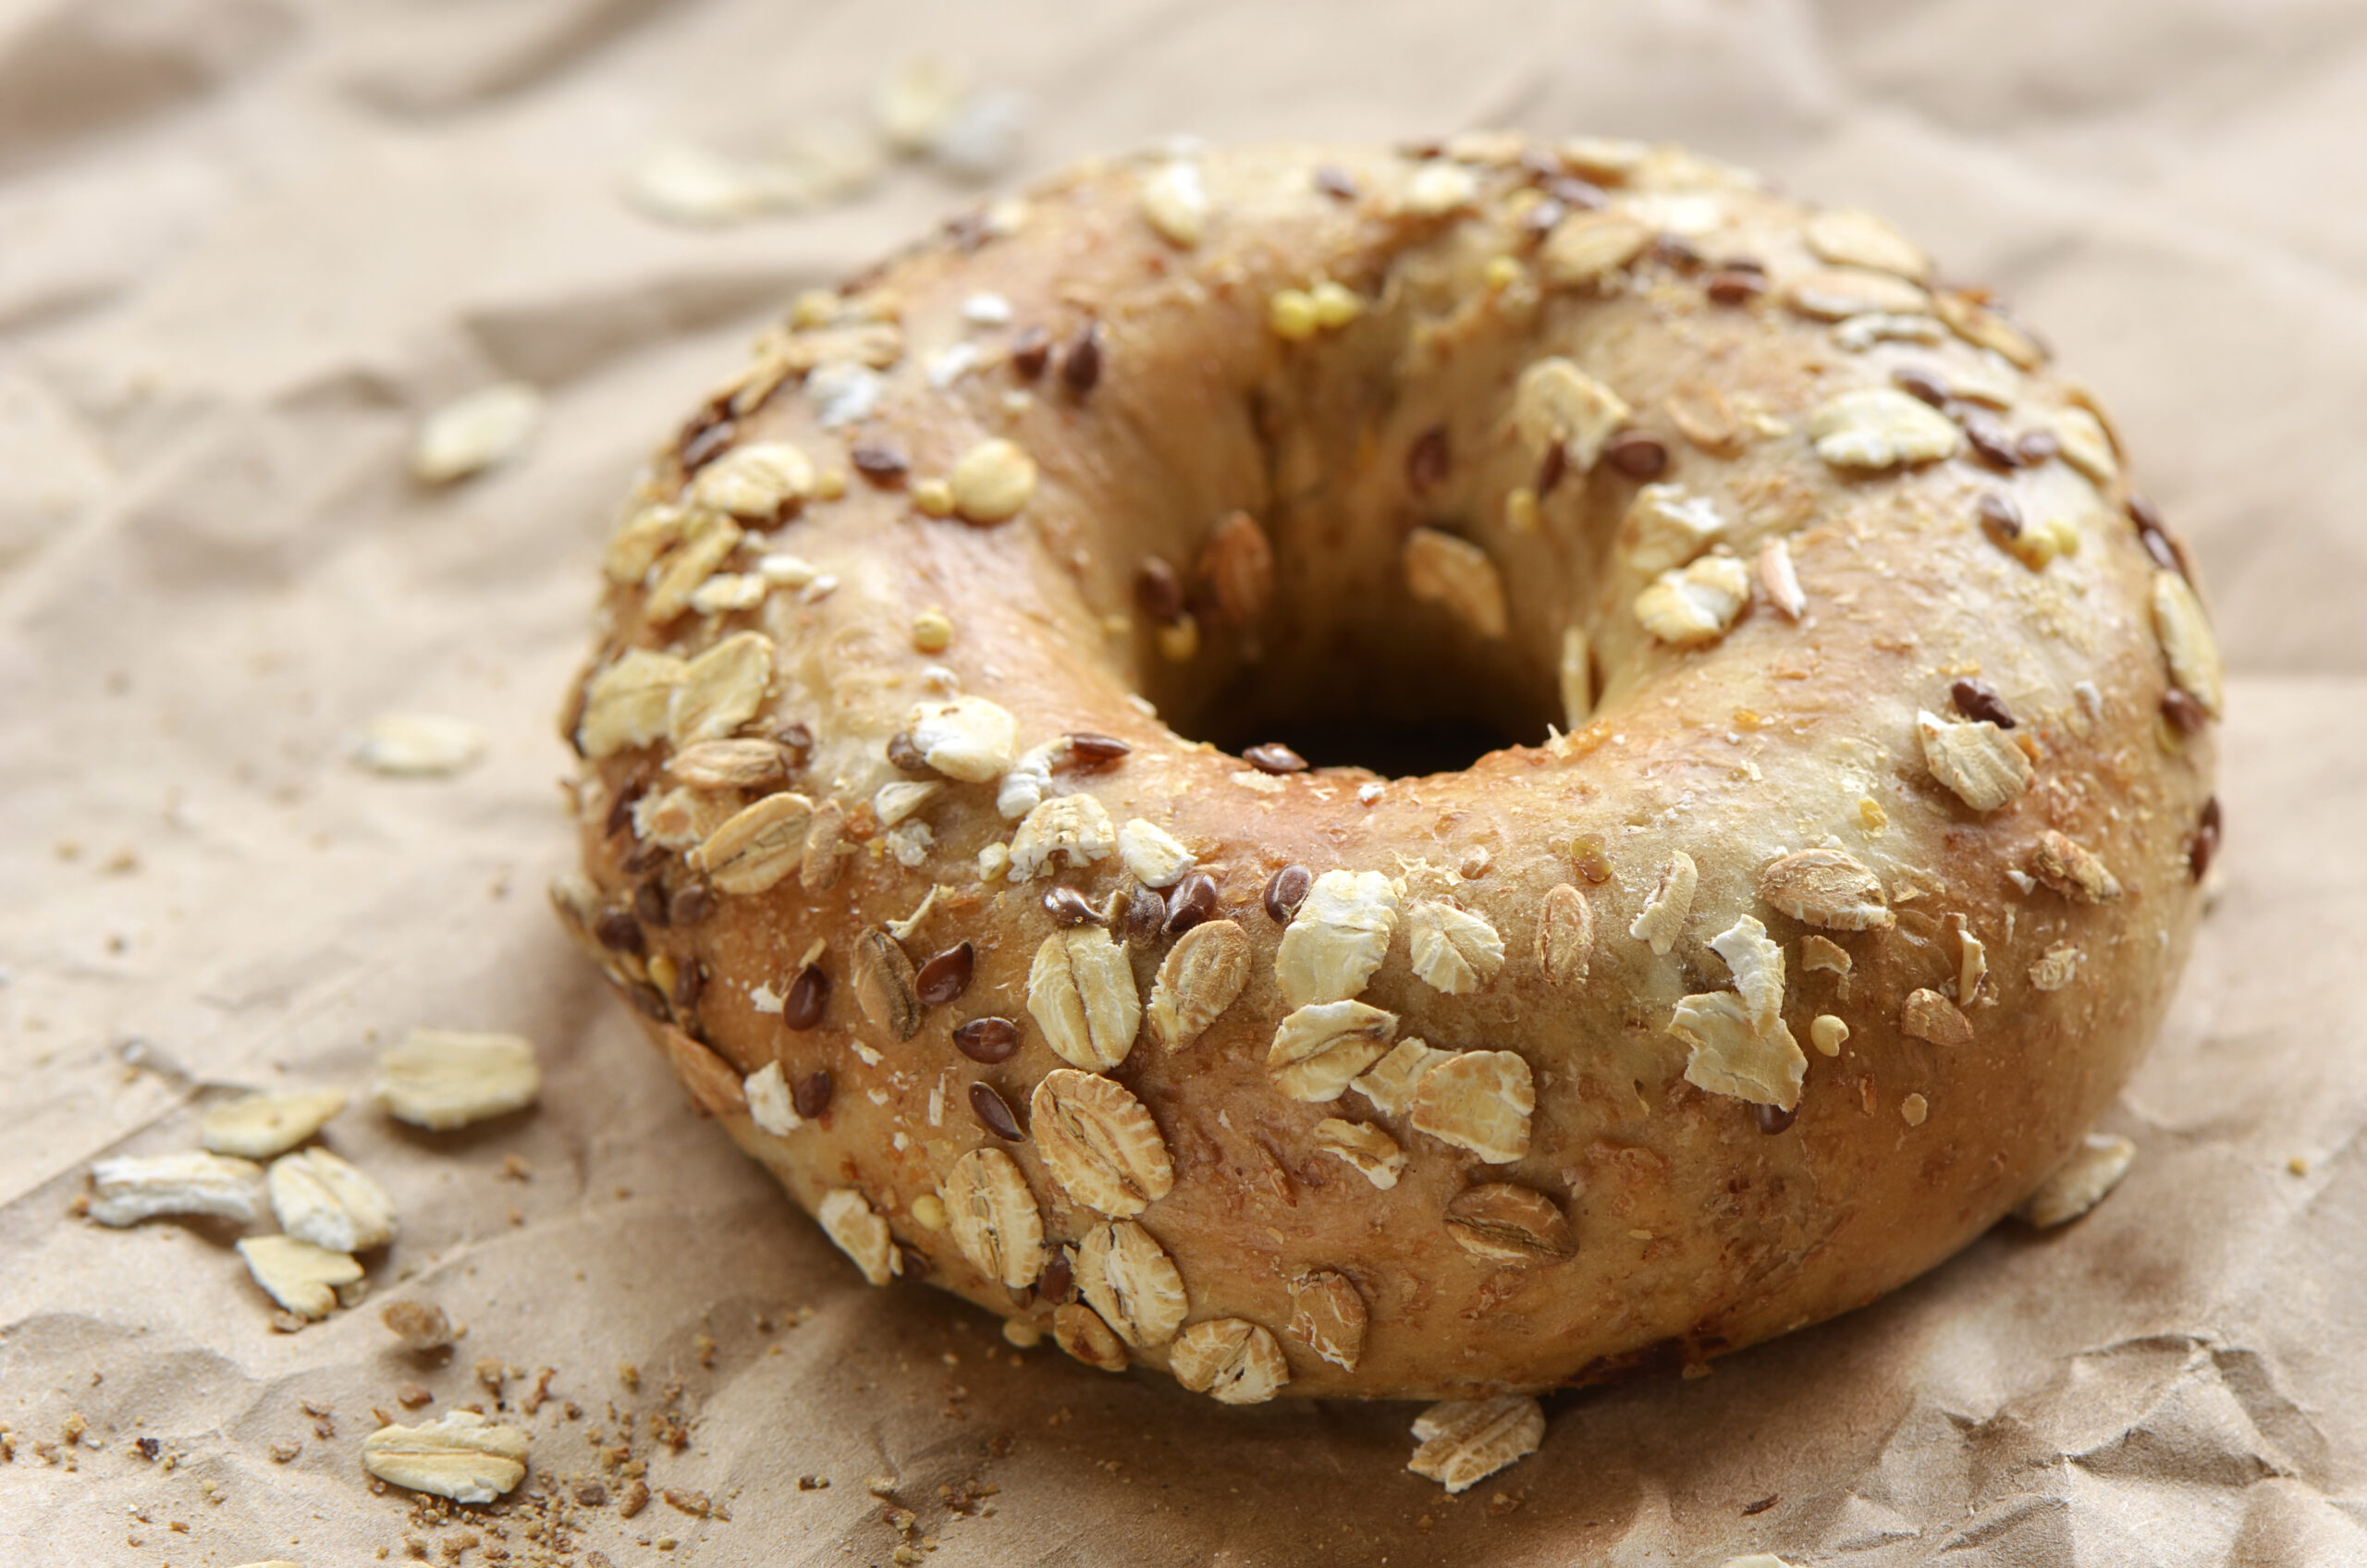 Multigrain bagel covered in oats and seeds on crinkled brown paper